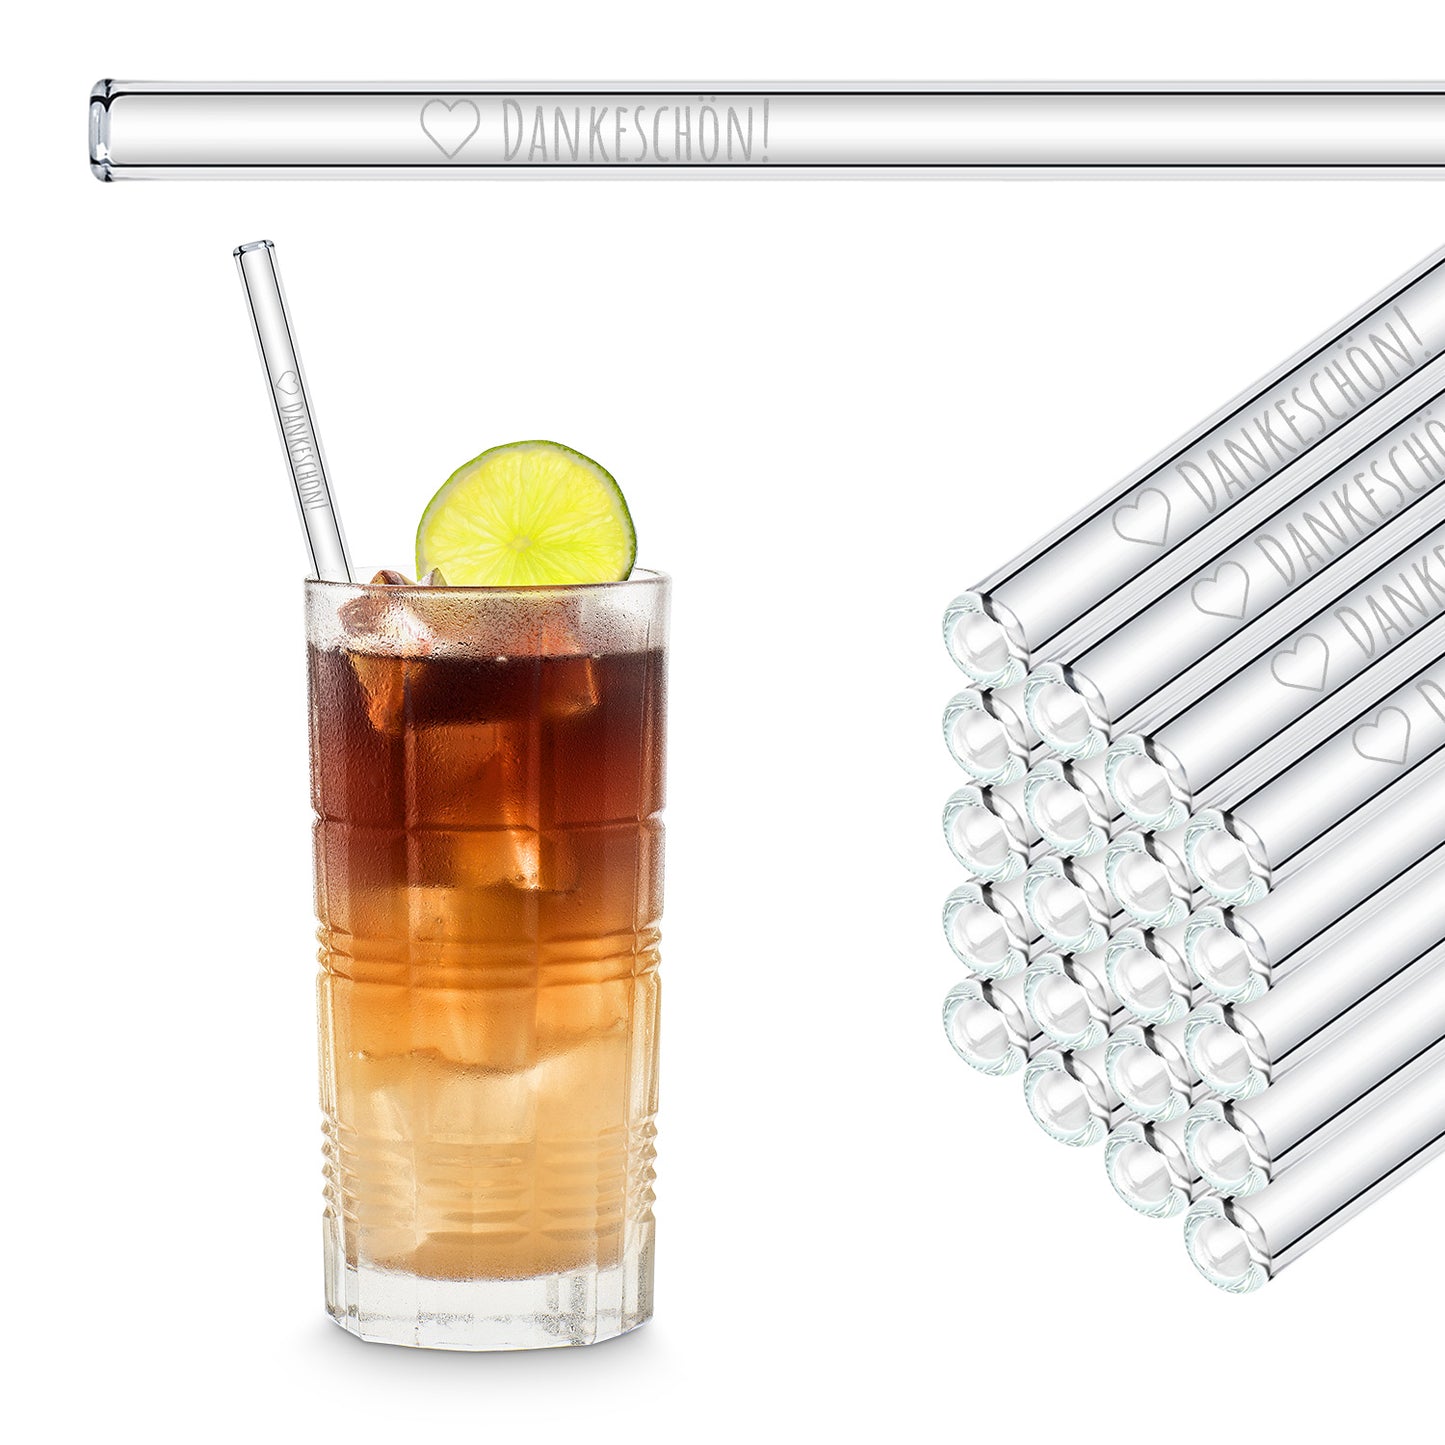 Thank you very much! 50x engraved glass straws - gift for wedding guests